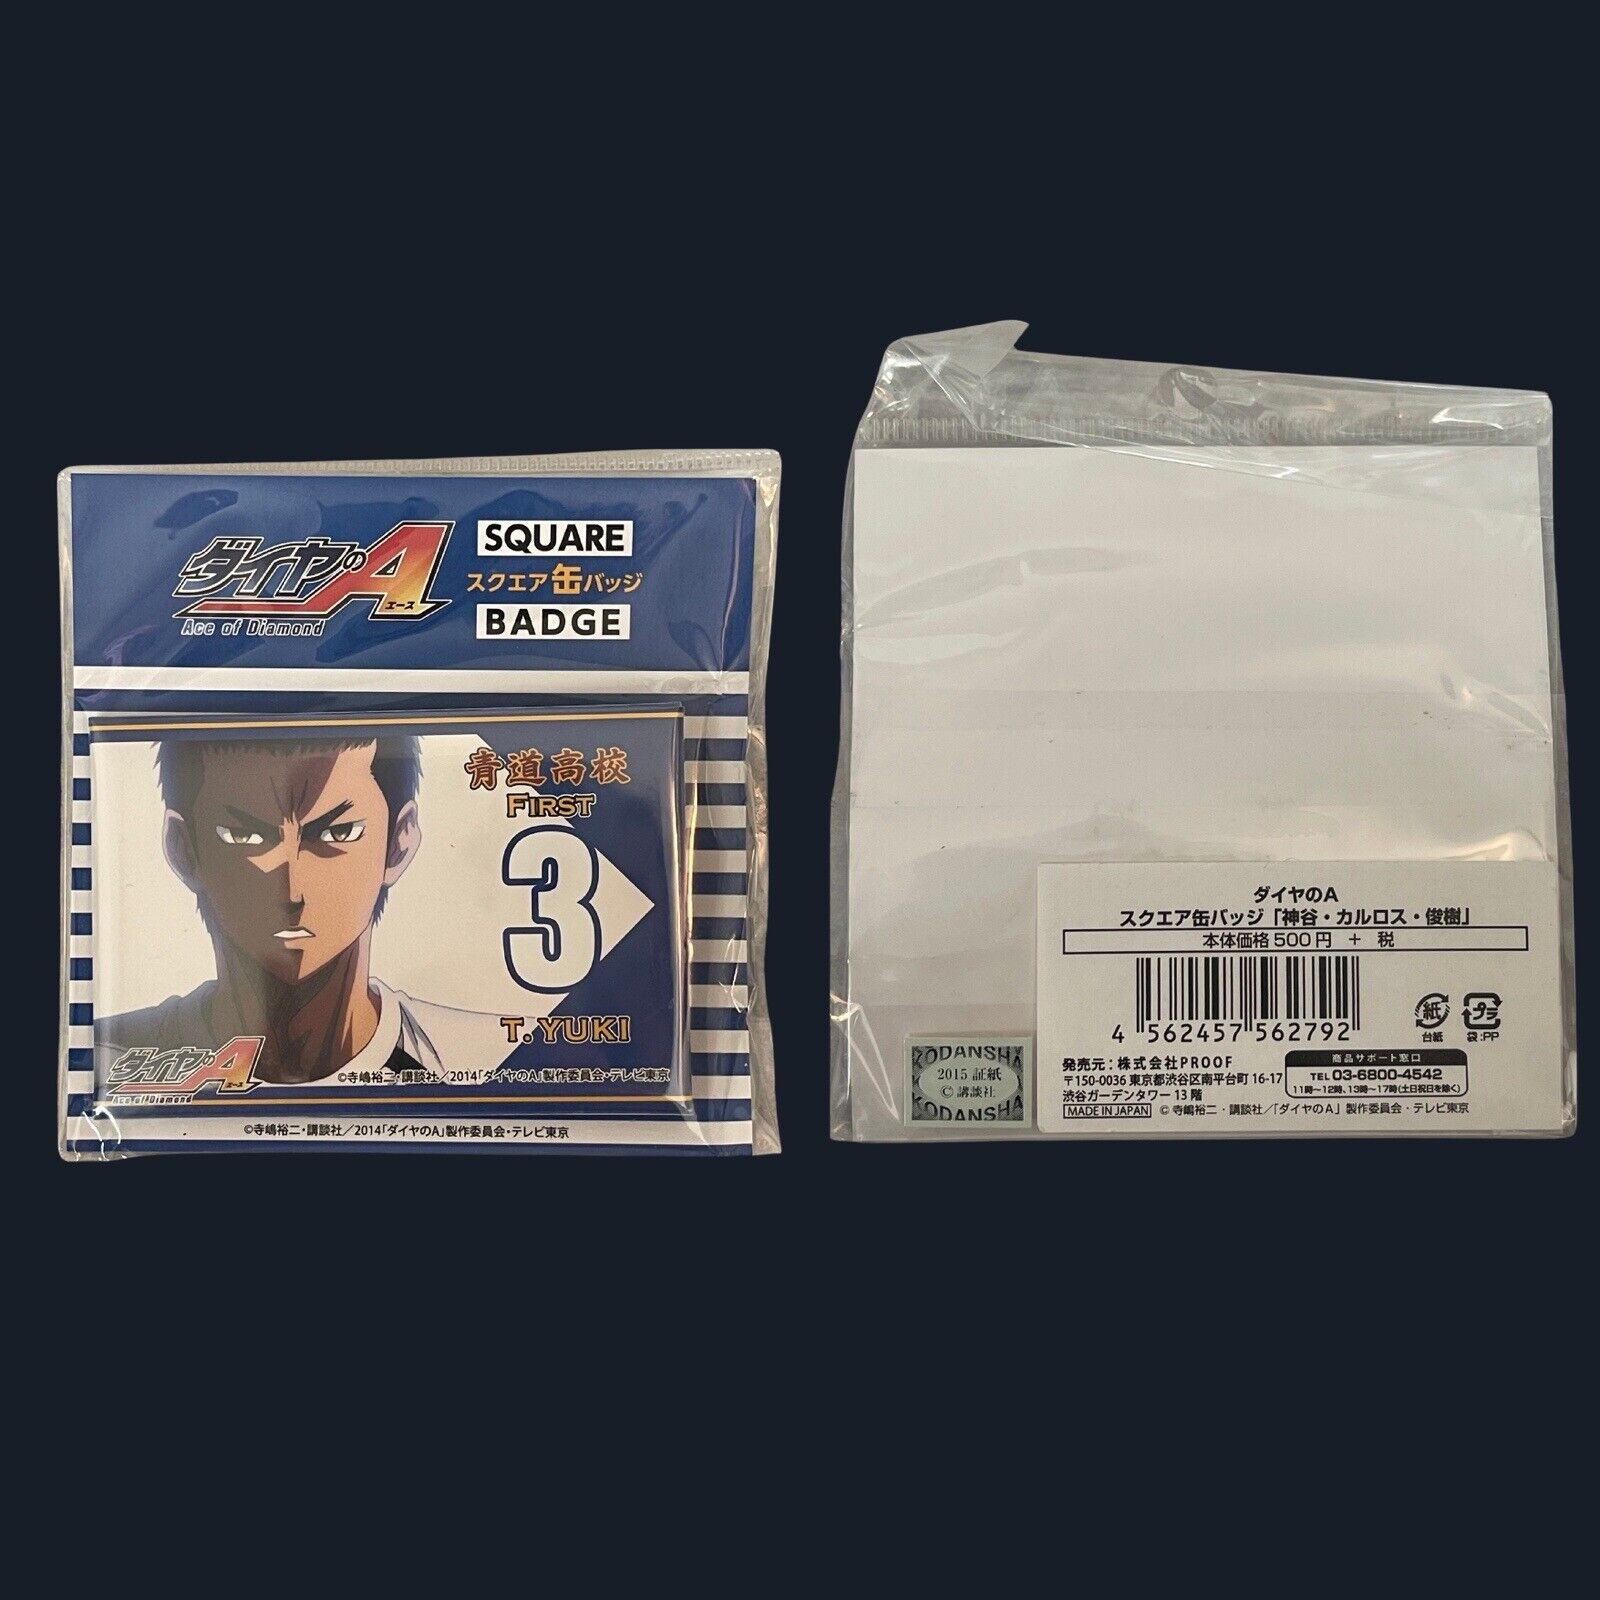 New Rare Ace of Diamond Square Can Badge Anime Manga From Japan